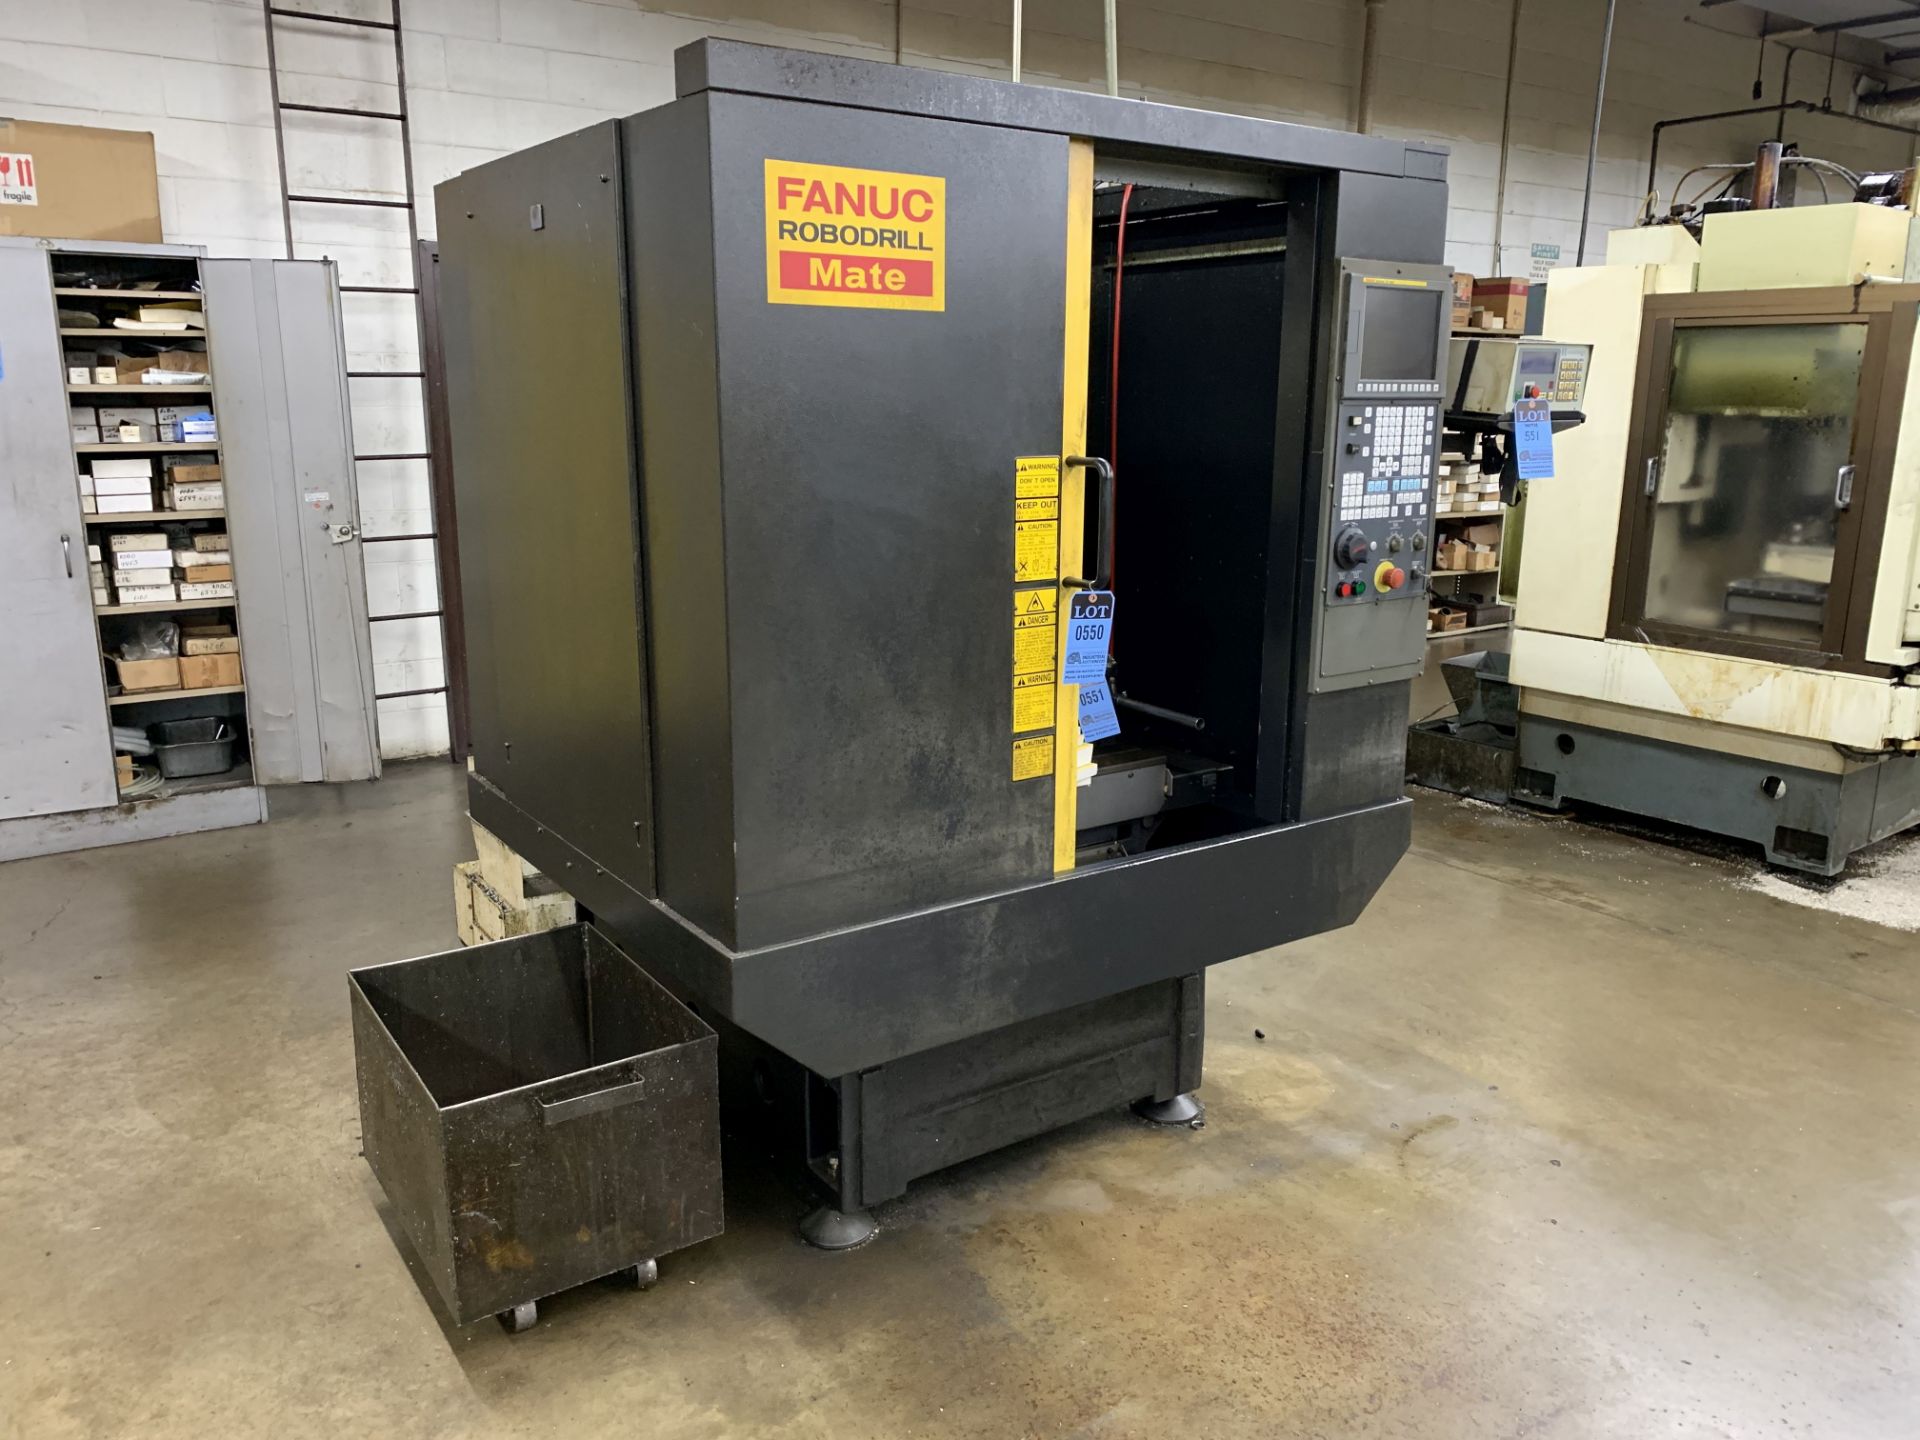 FANUC MODEL ROBODRILL MATE CNC DRILL AND TAPPING CENTER; S/N 071VN201, FANUC Oi-MC CONTROL, 25.6" - Image 2 of 8